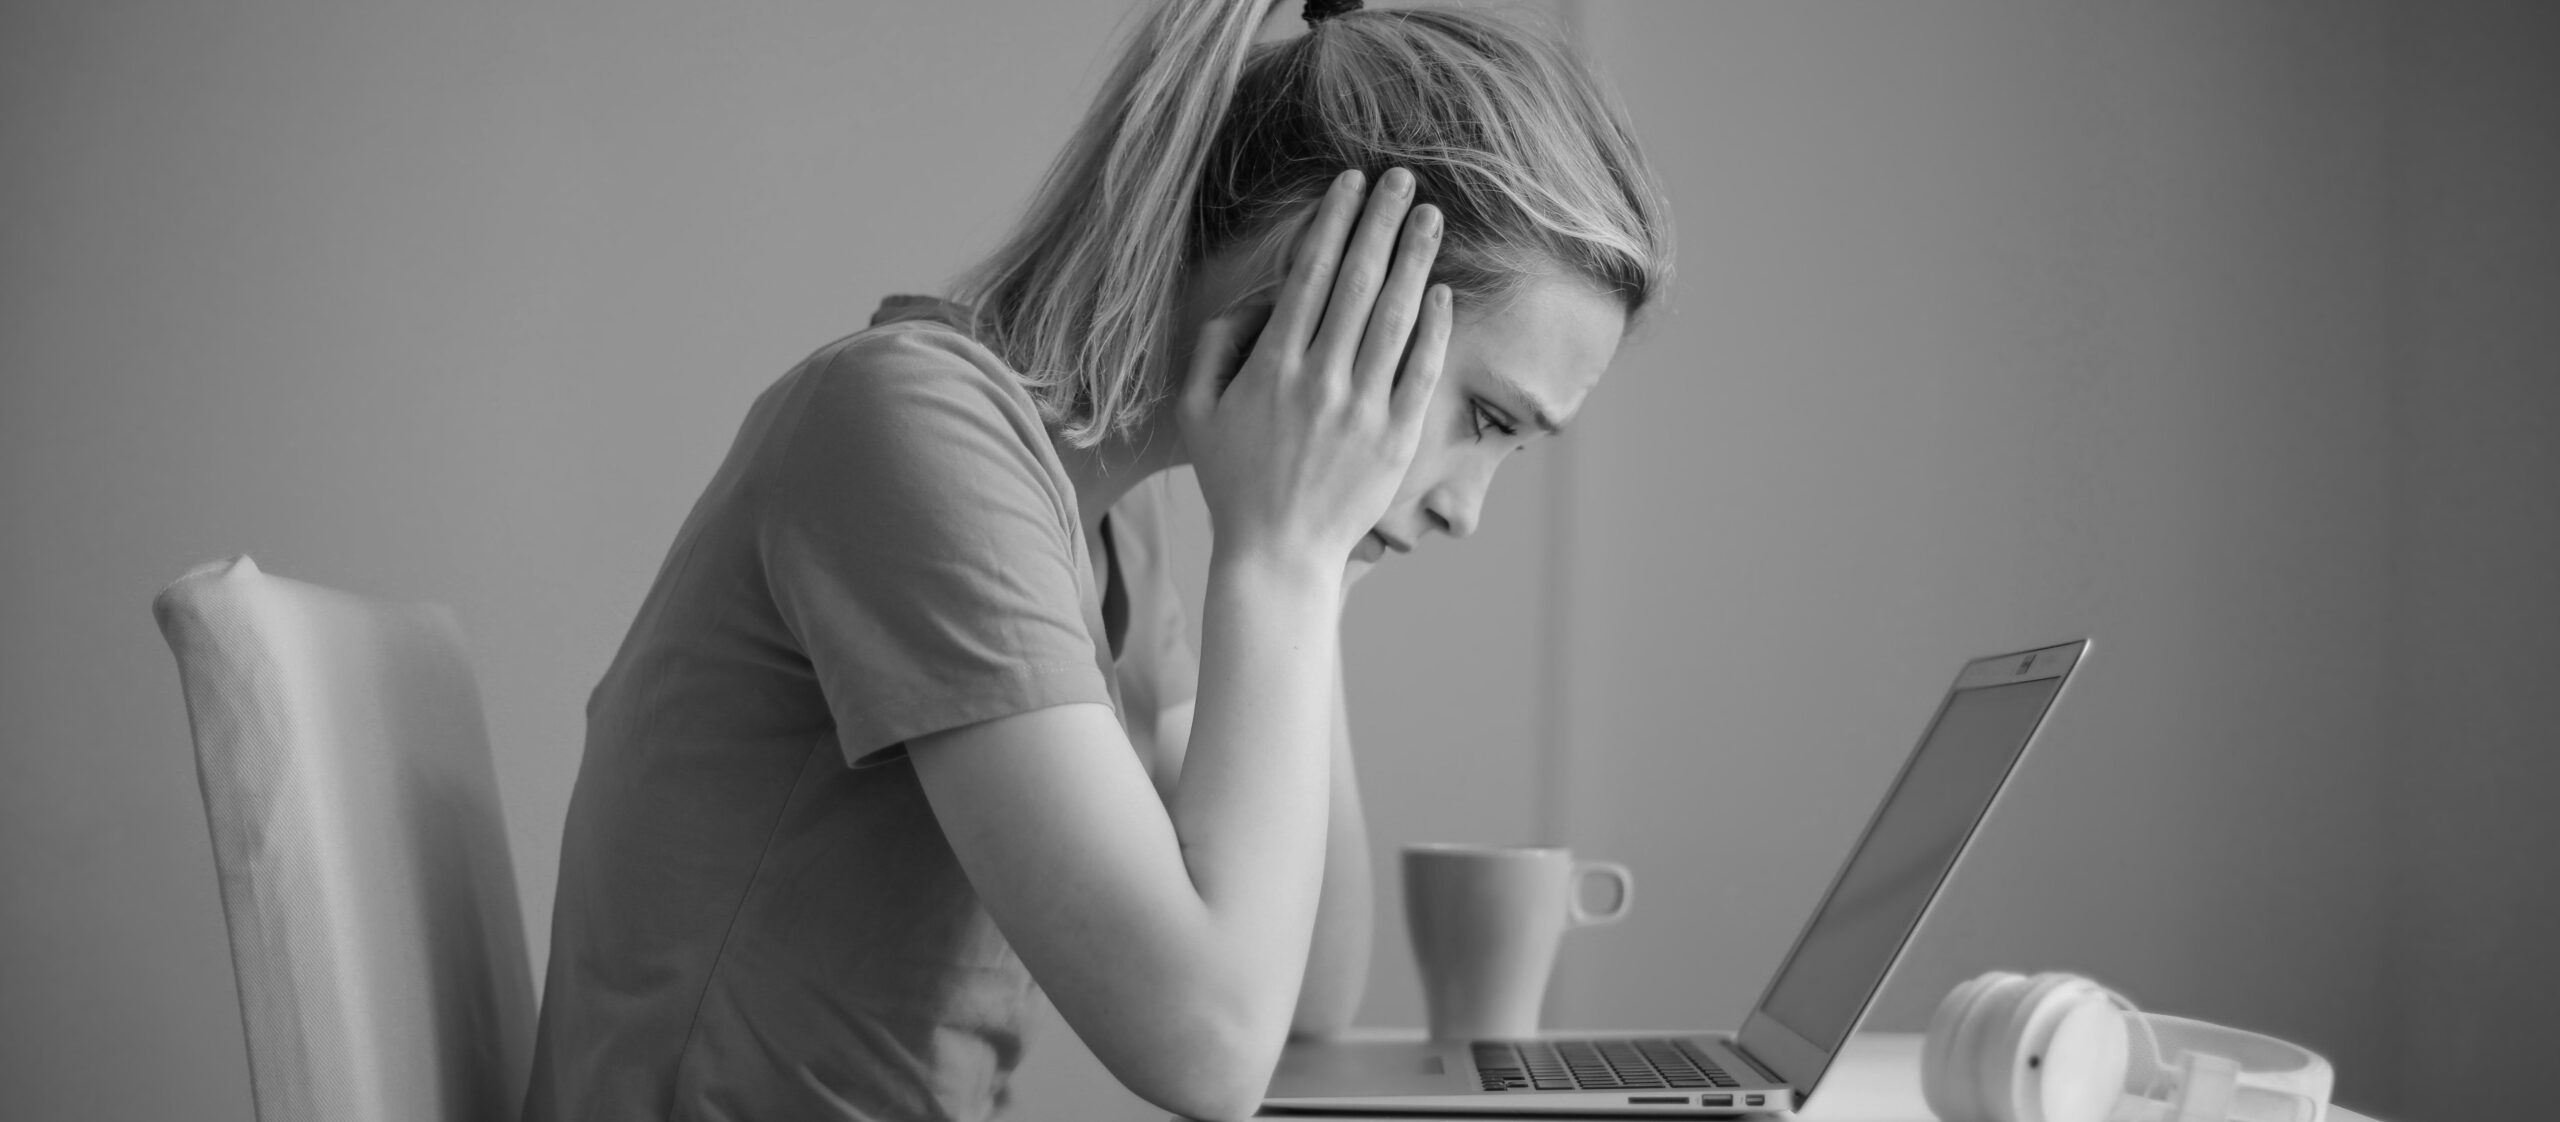 Frustrated and worried woman looking at a laptop with hands on her face